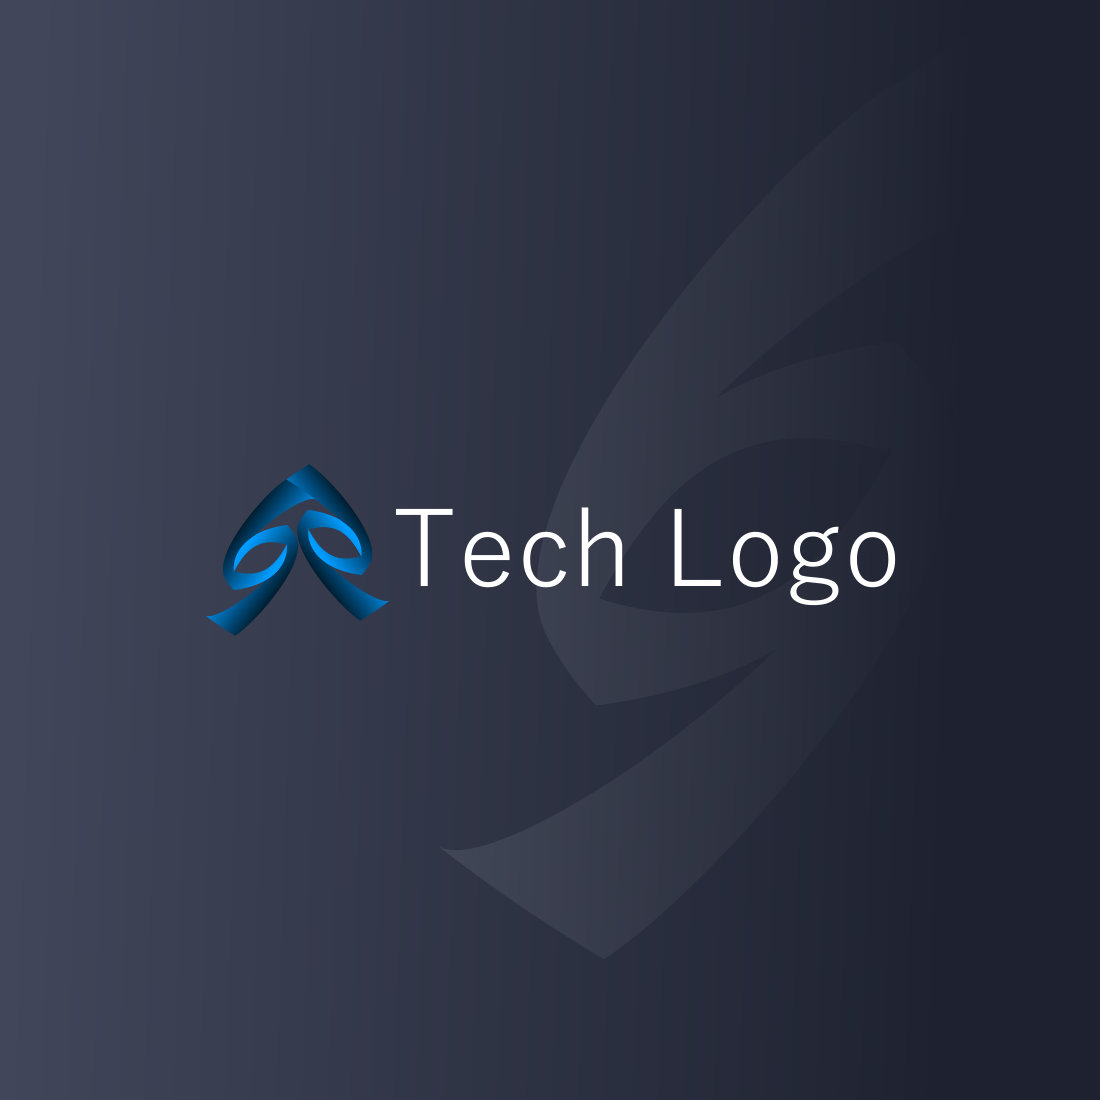 Minimalistic logo with a lettering.